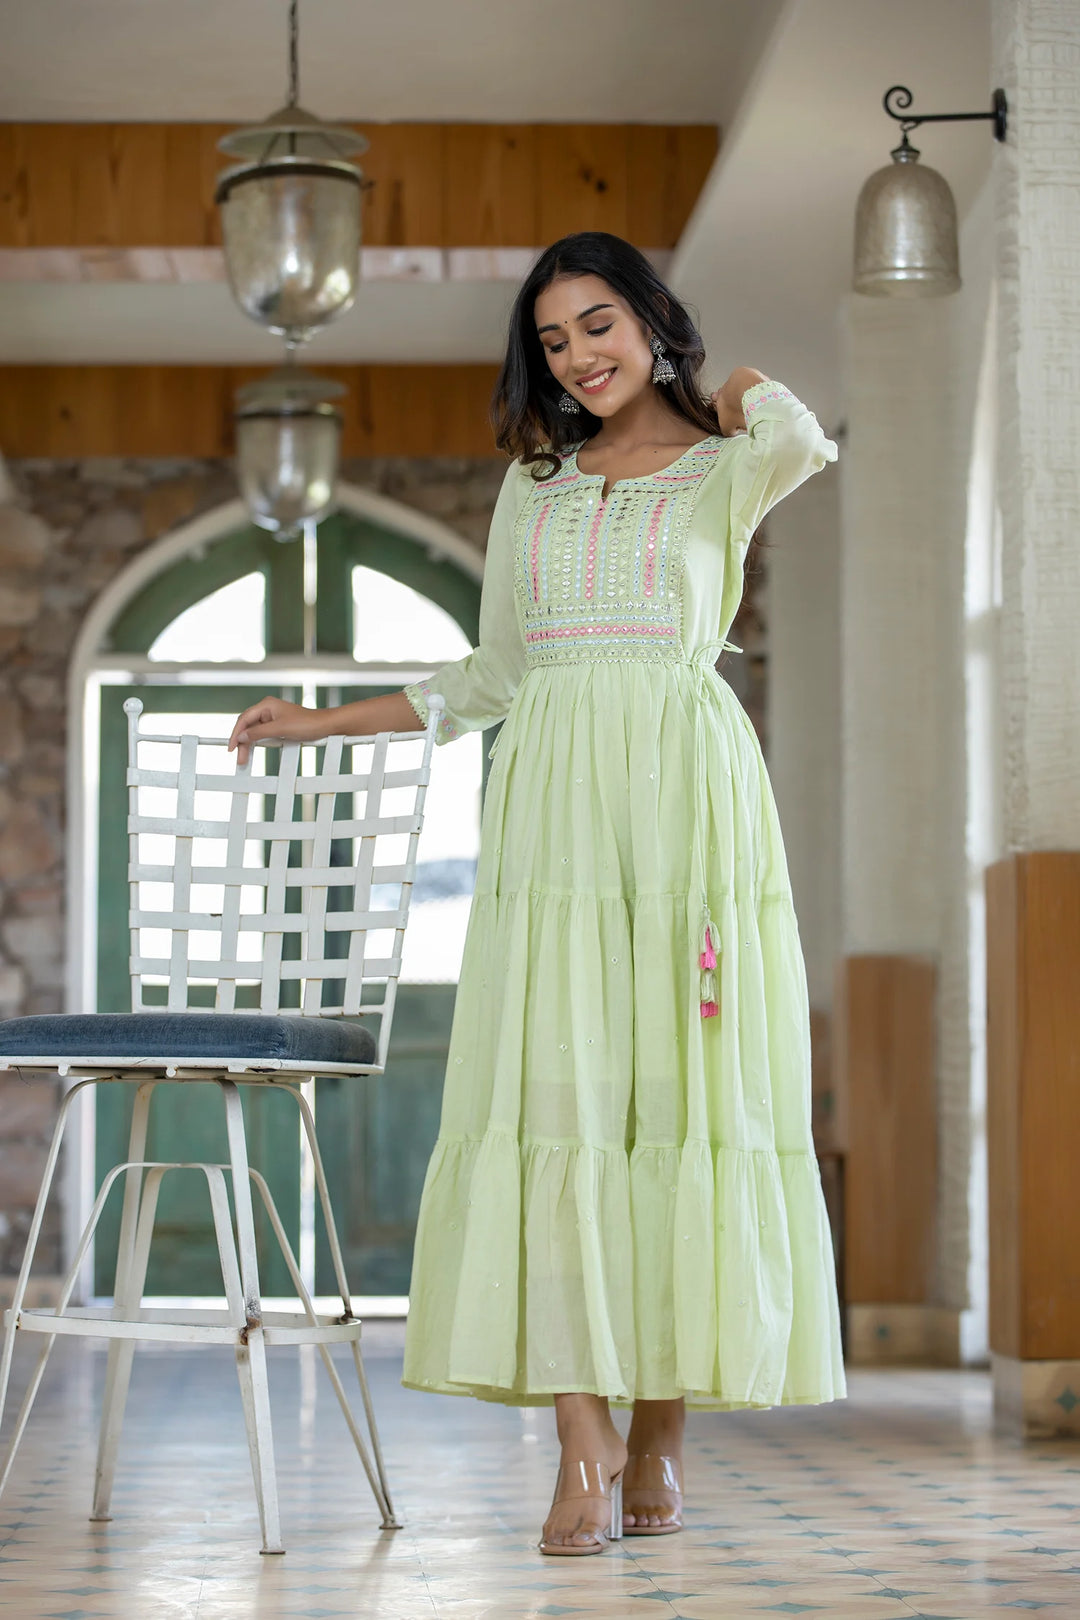 Buy Green Ethnic Dress for ladies | Best Indian Traditional Dress for Women Online